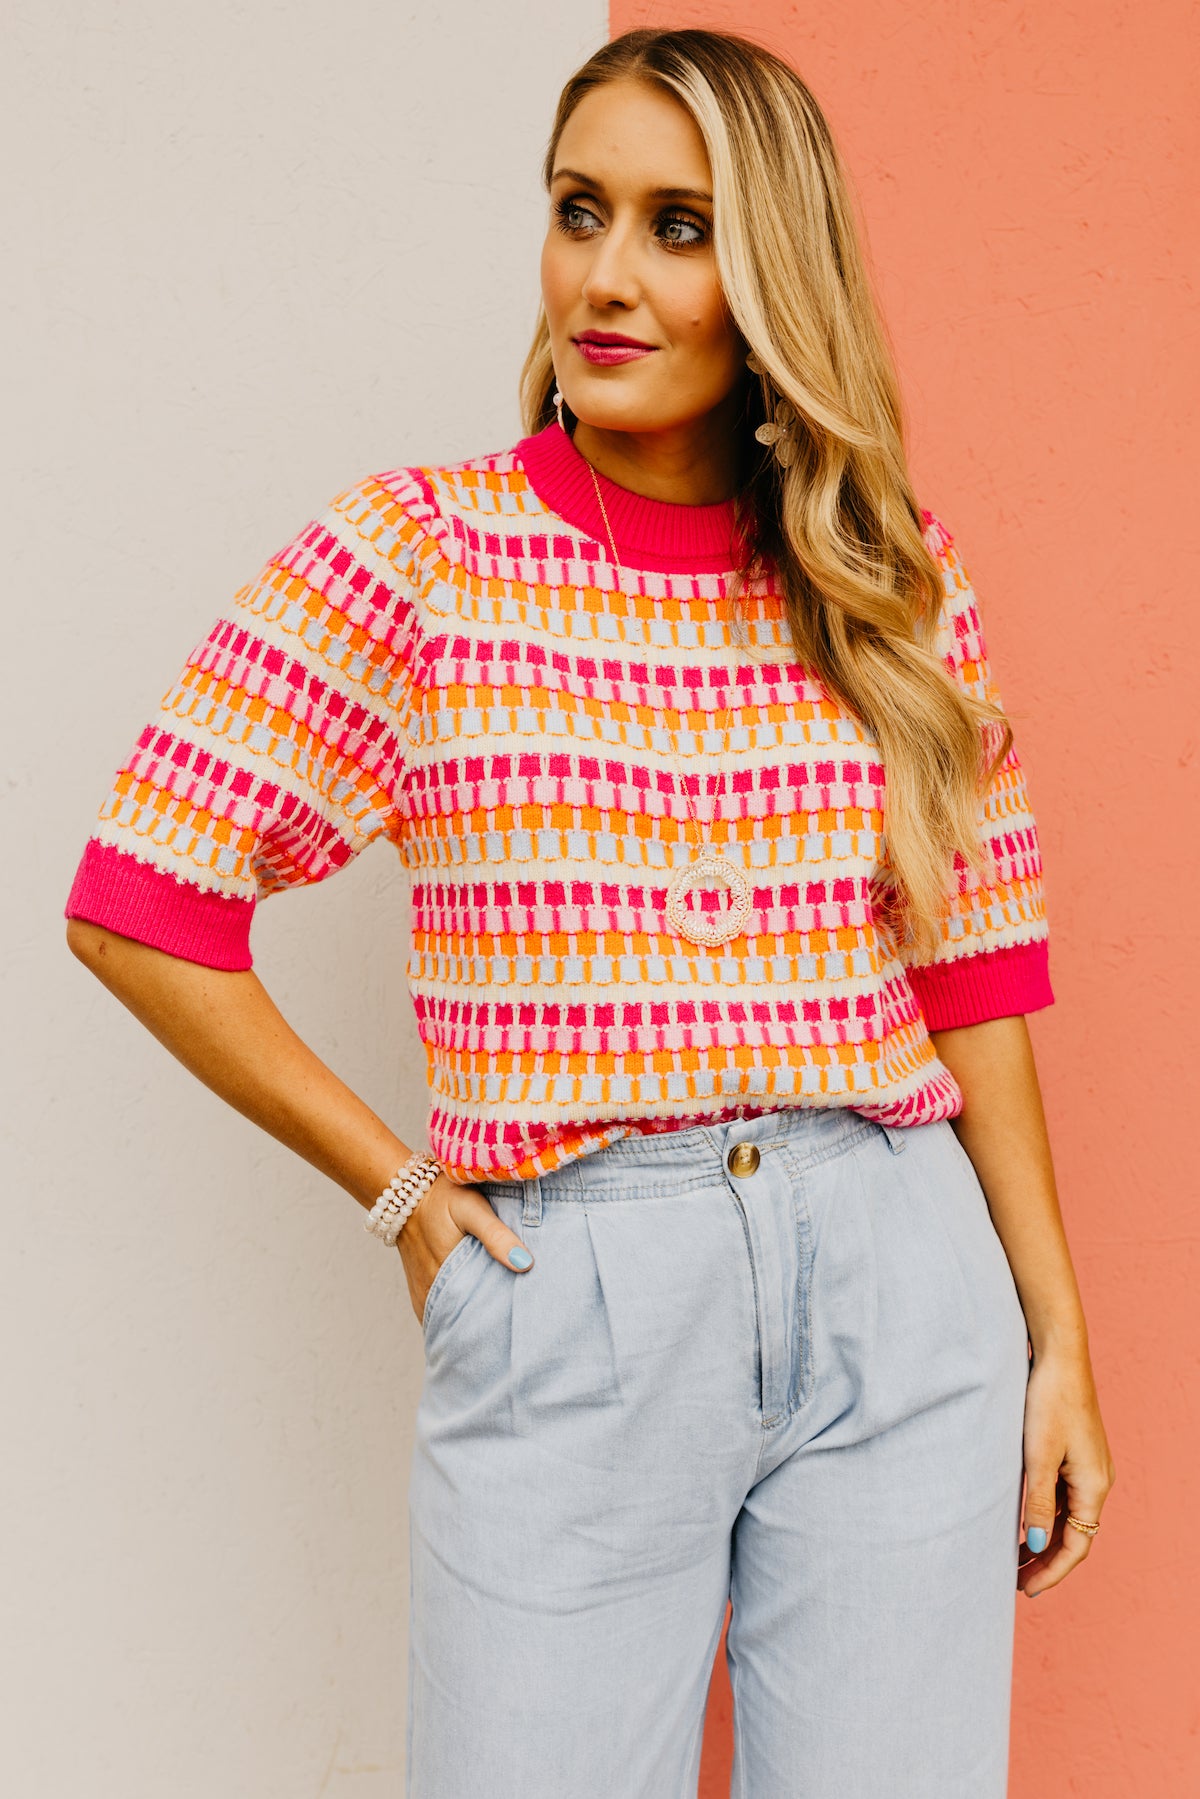 The Kane Striped Knit Sweater Top